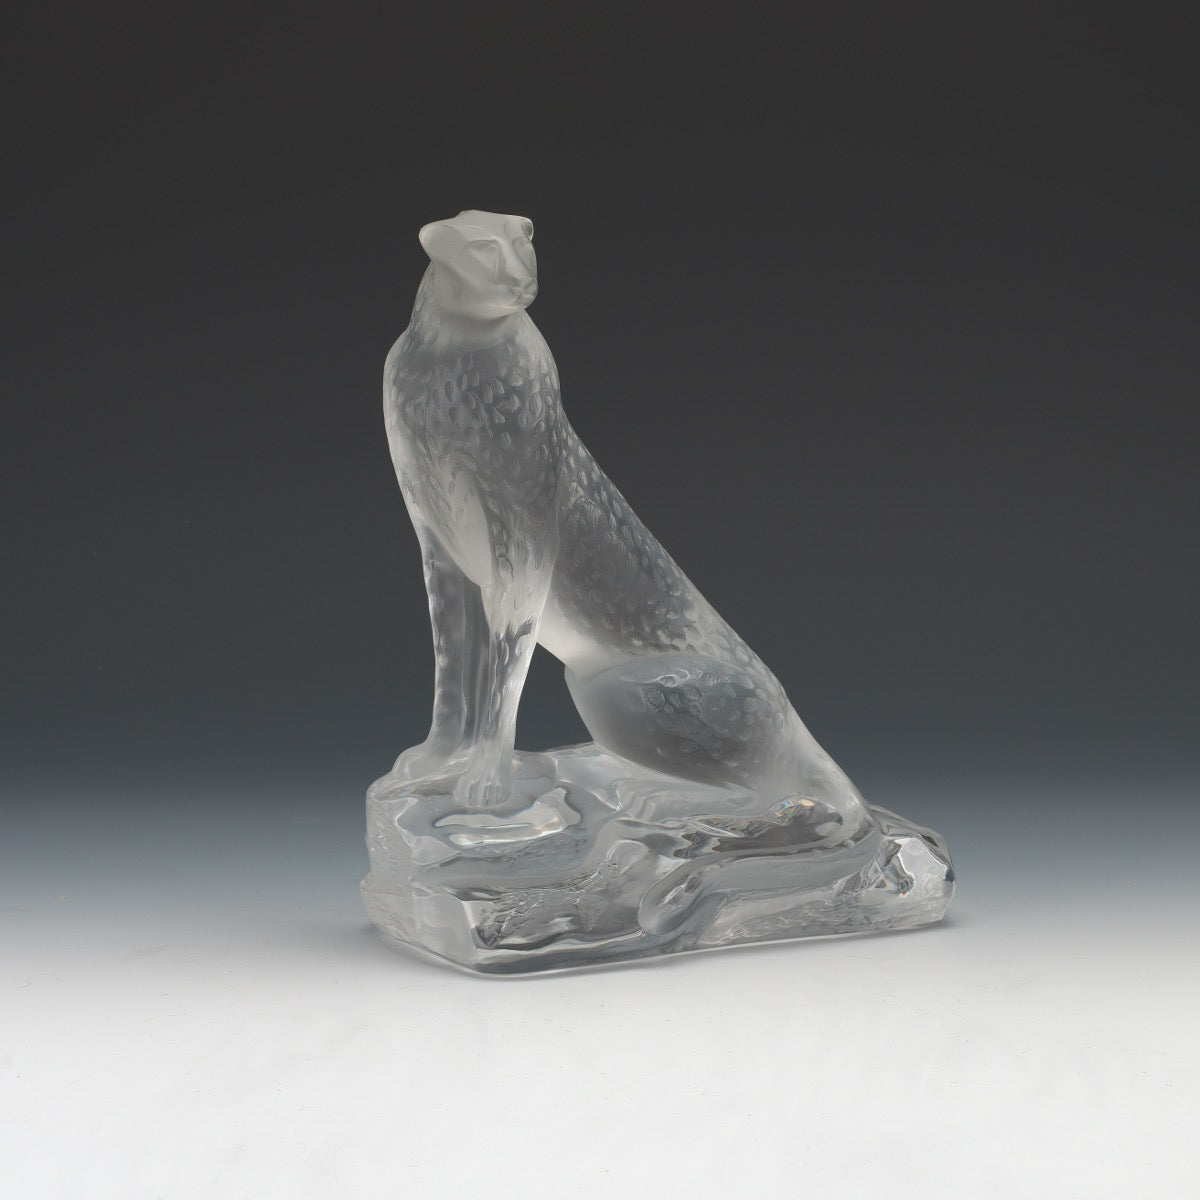 Lalique Glass Figurines: Worth the Buy?